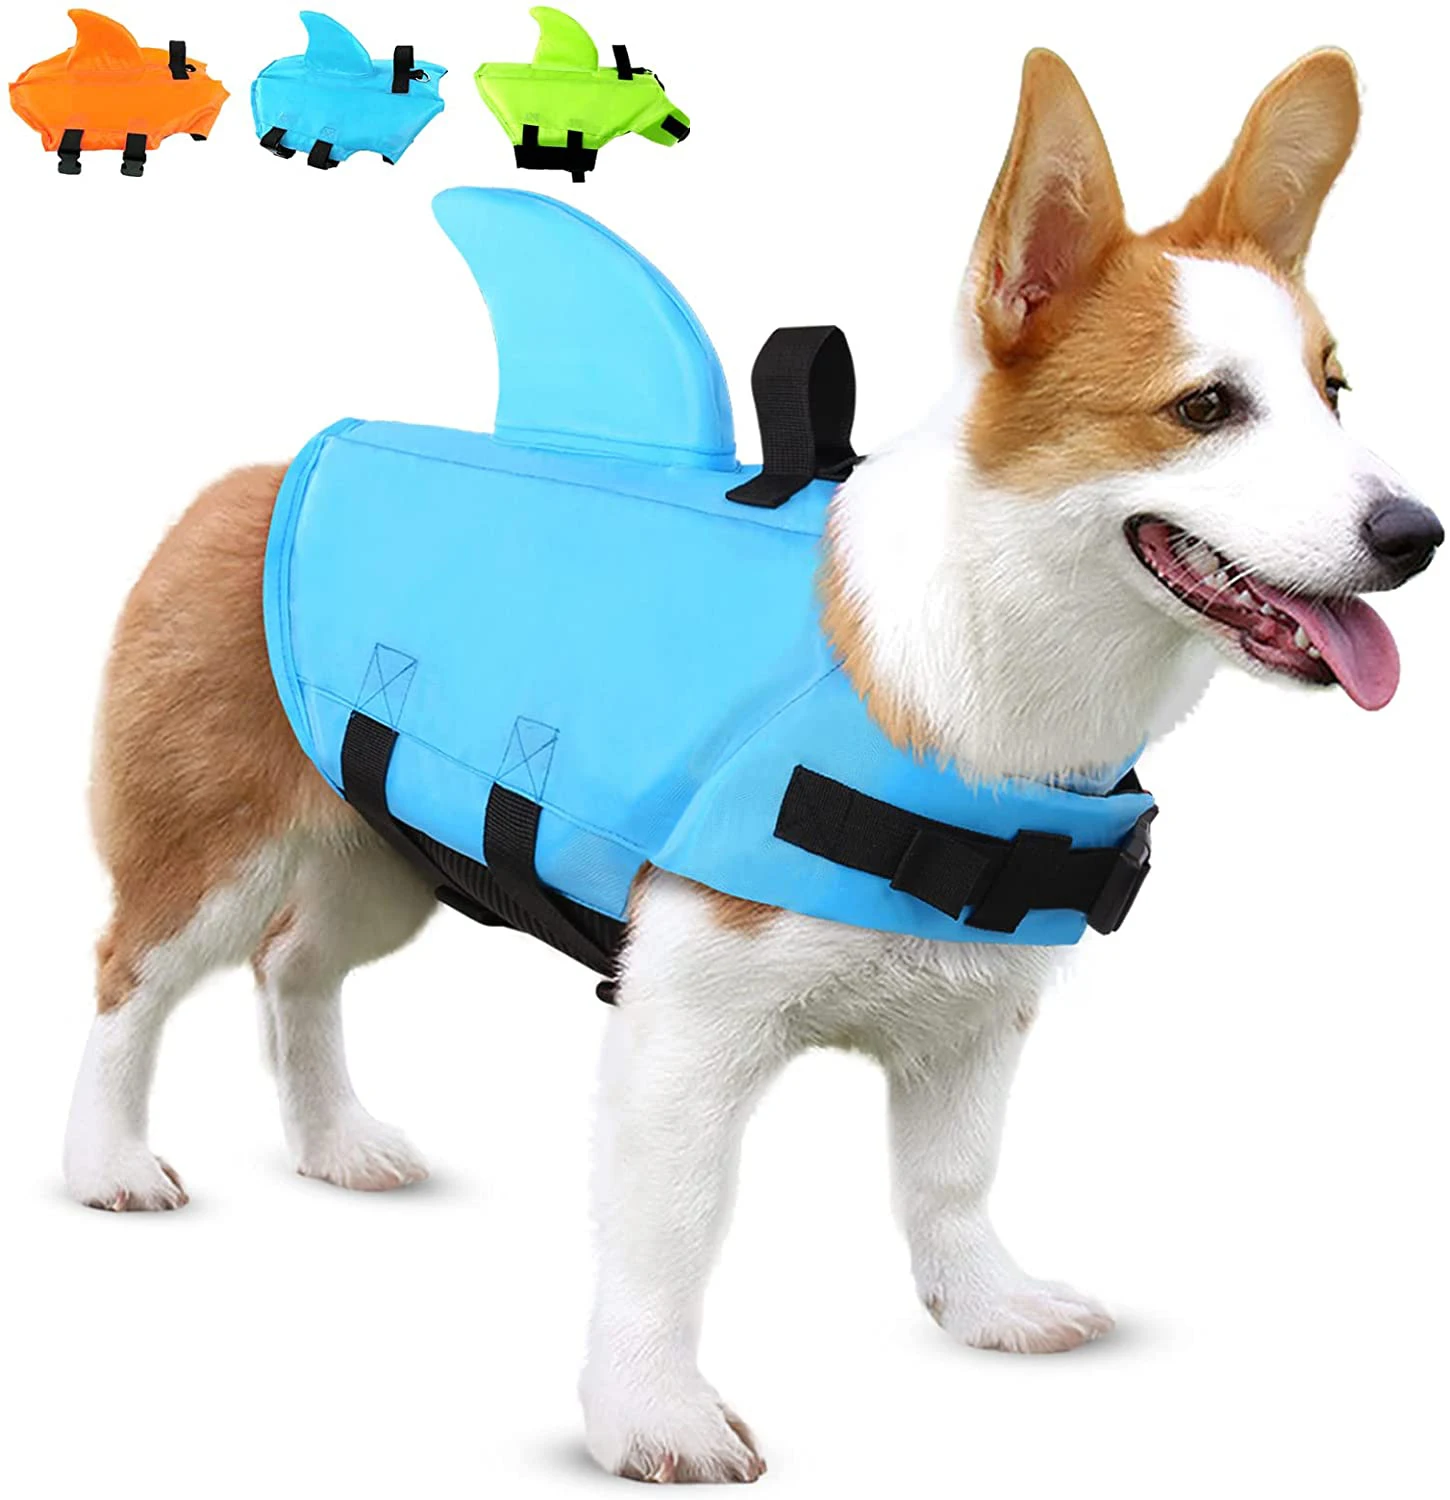 Dog Life Jacket Vest Summer Shark Pet Life Jacket Dog Clothes Dogs Swimwear Pets Swimming Suit Safety Clothes XS-2XL Outdoor